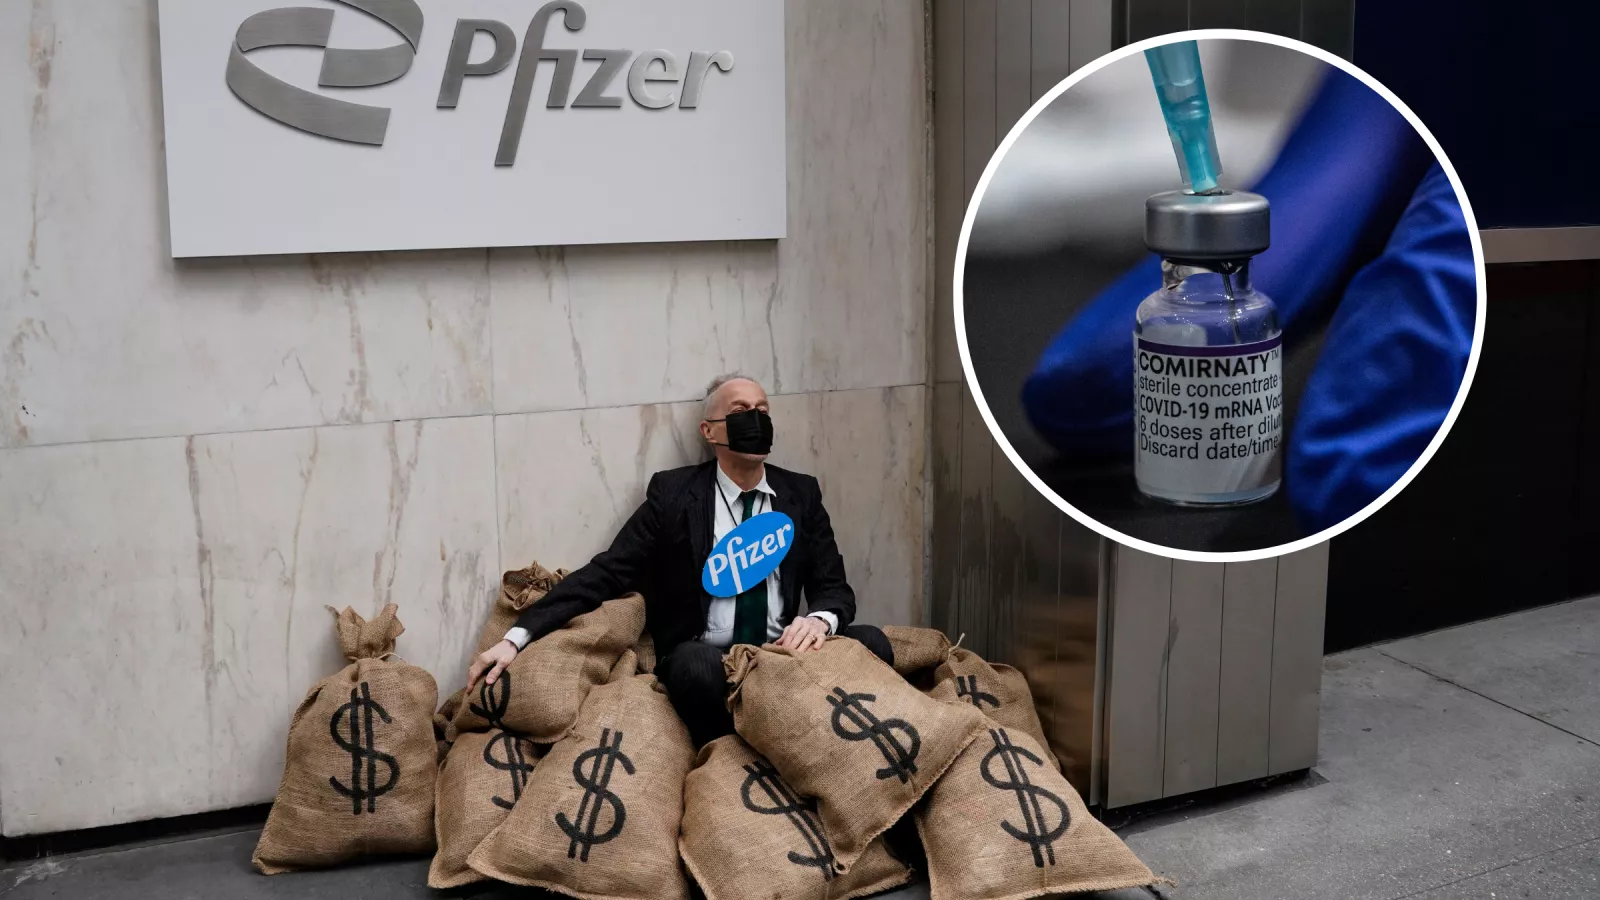 Pfizer Accused of 'Obscene' COVID Profits After Posting Record Revenues